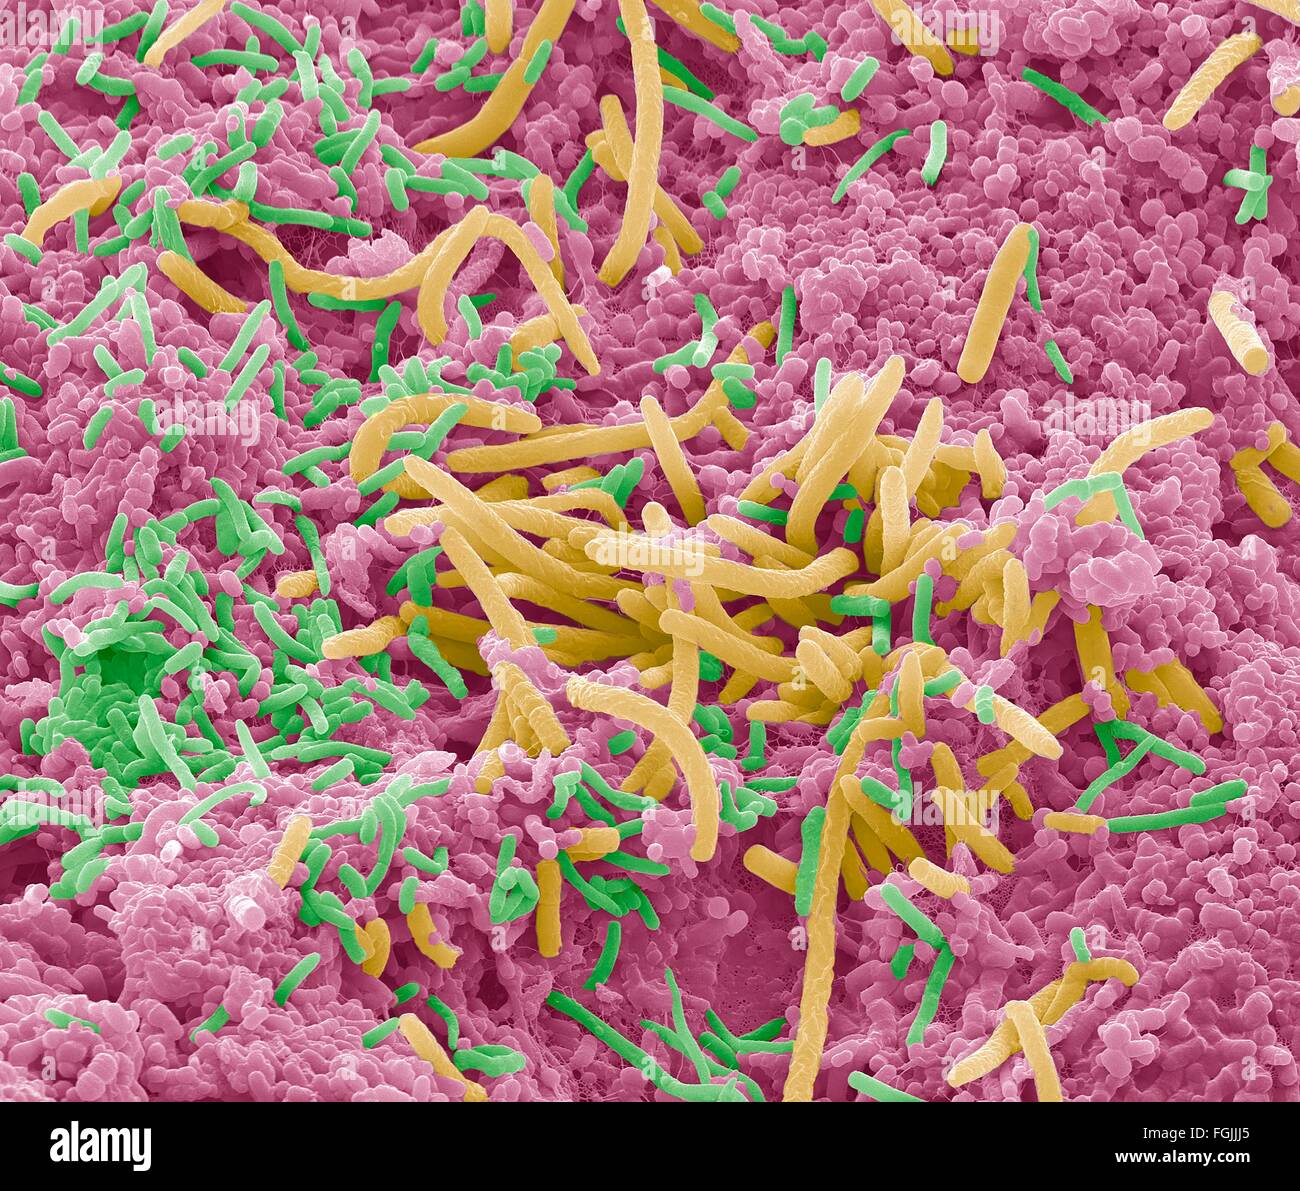 Tongue bacteria. Coloured scanning electron micrograph (SEM) of bacteria on the surface of a human tongue. Large numbers of Stock Photo